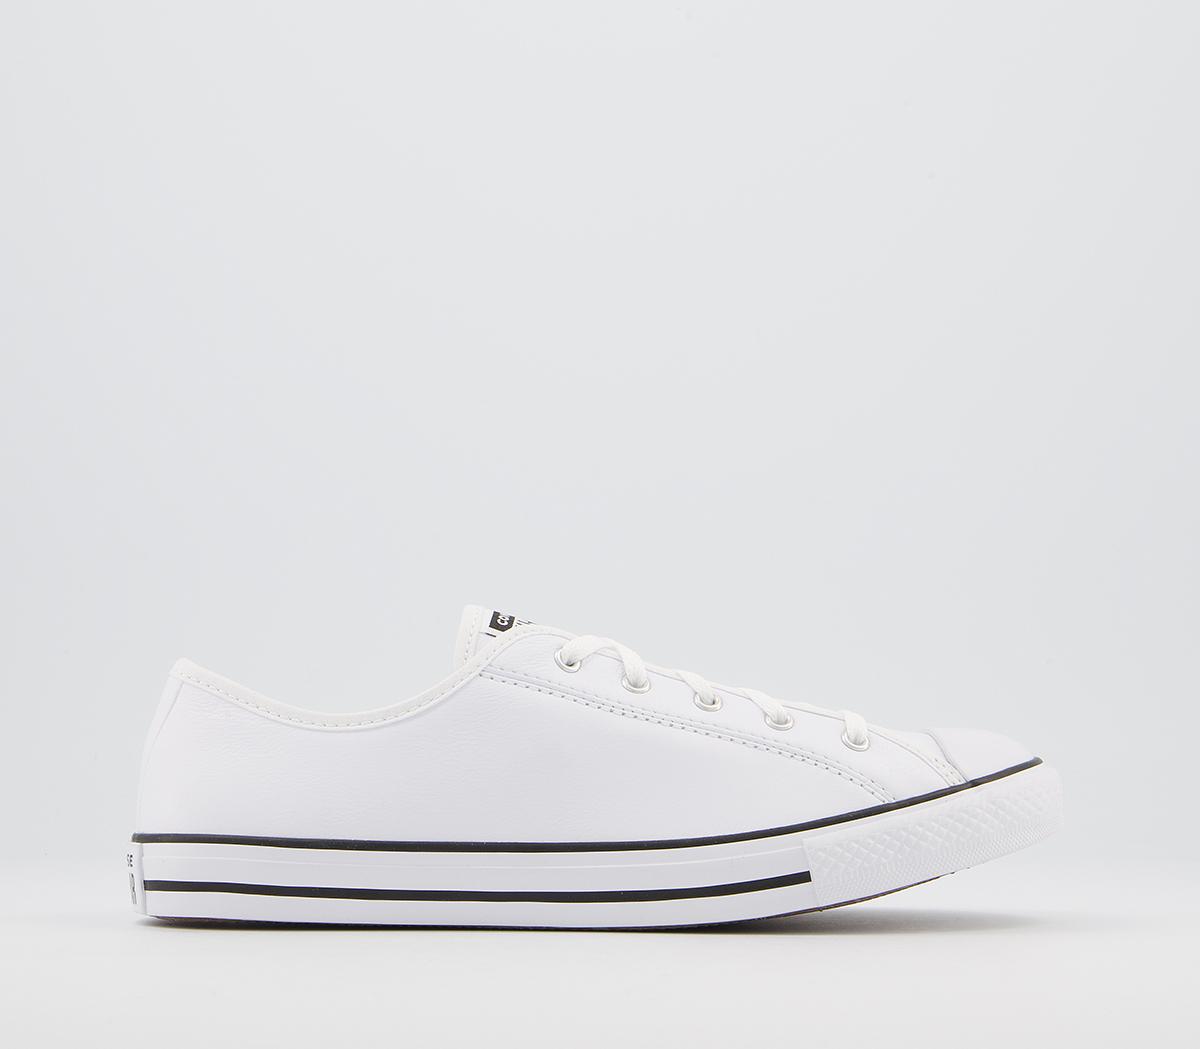 ConverseAll Star Dainty TrainersLeather White Black White